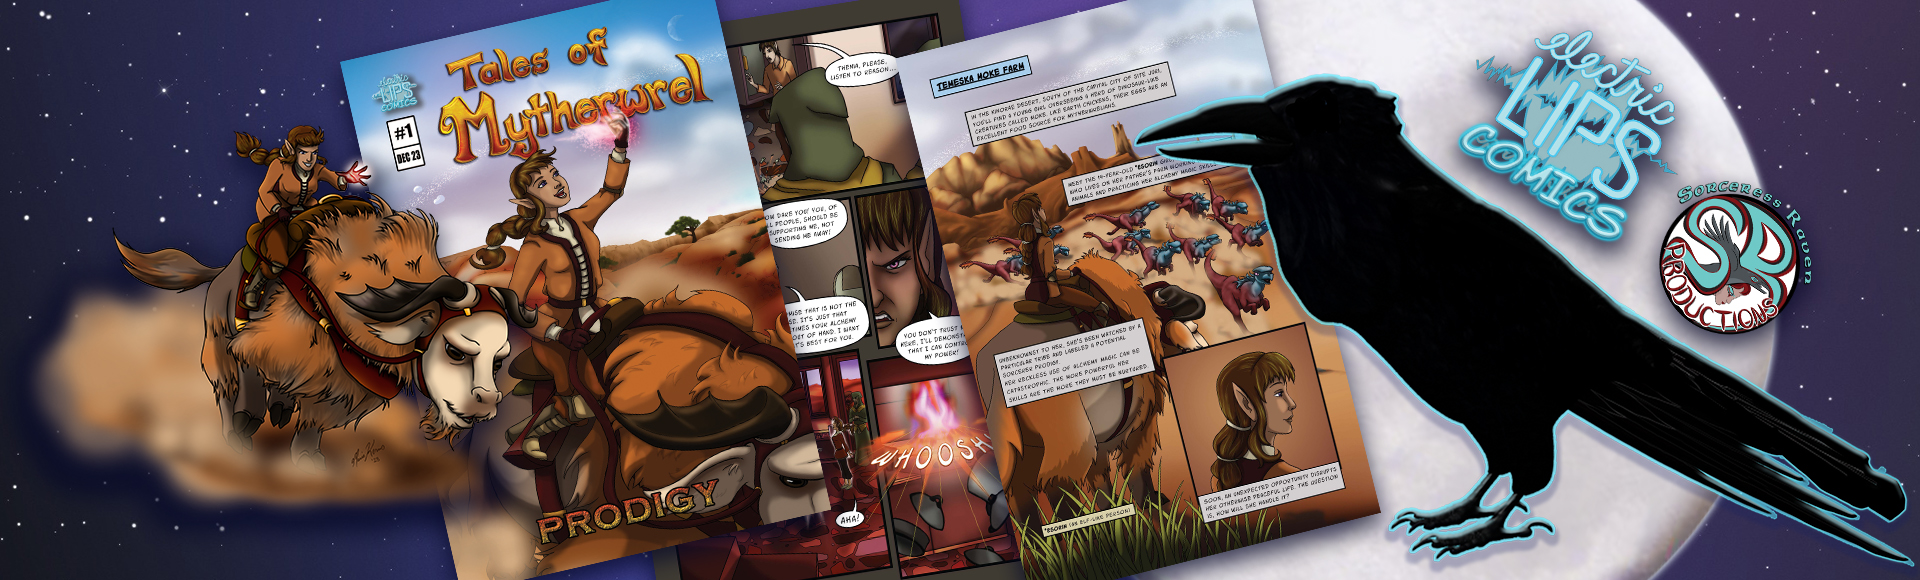 Tales of Mytherwrel, the Comic Book!